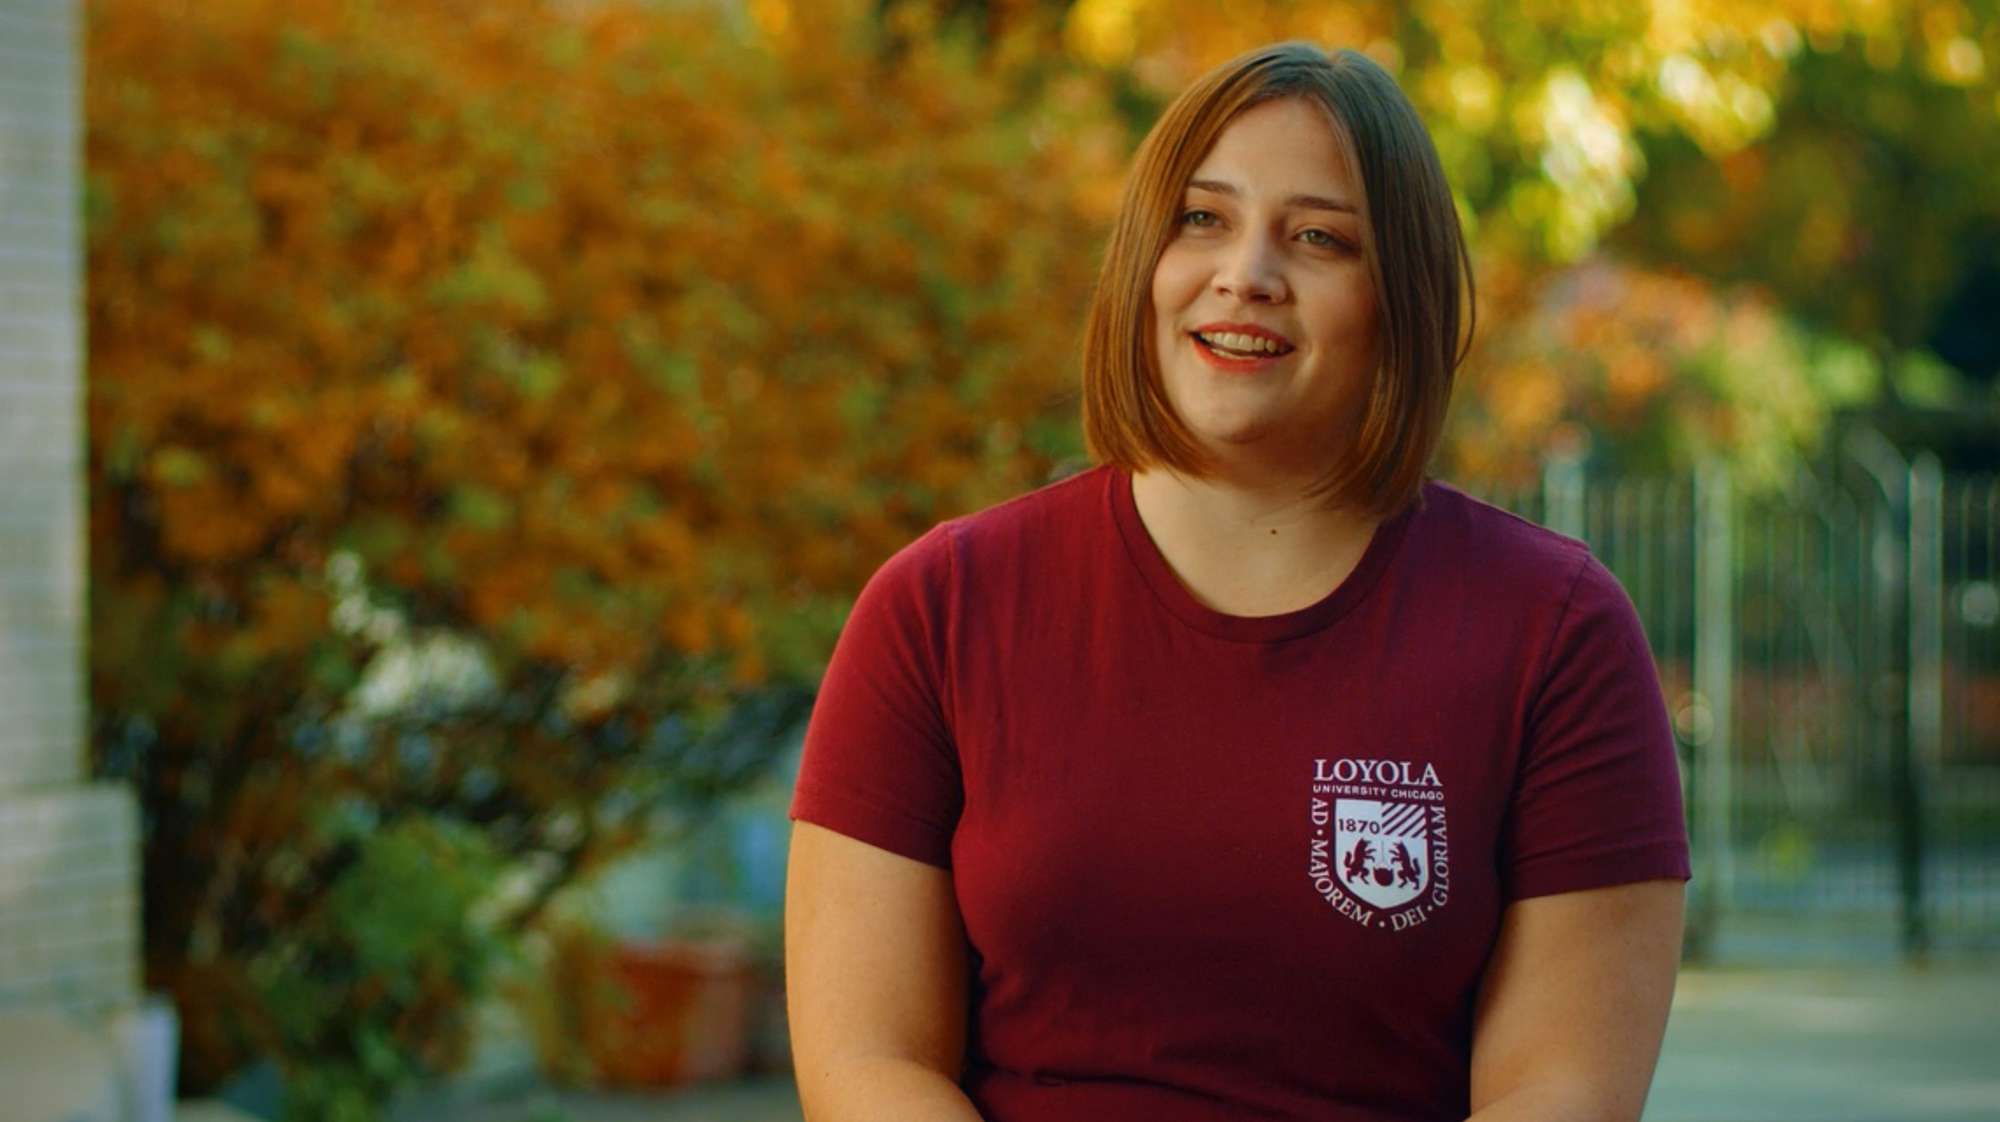 Still scene from a video; a college-age woman in a Loyola shirt addresses the camera.